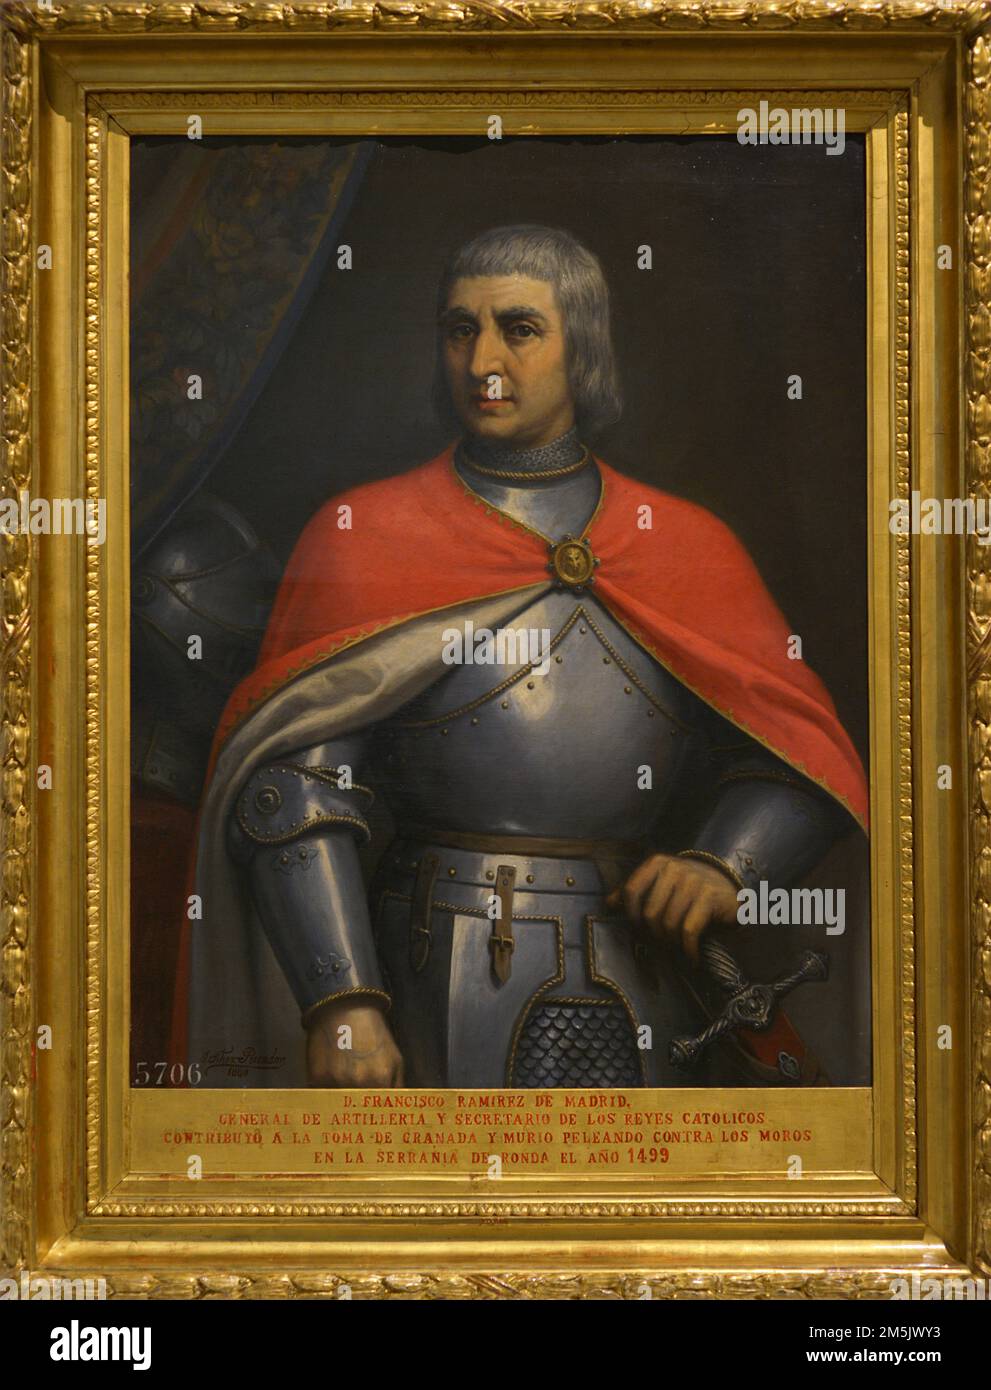 Francisco Ramirez de Madrid (c. 1445-1501), the Artilleryman. Artillery General and Secretary to the Catholic Monarchs. He took part in the capture of Granada. Died fighting against the Muslims in Sierra Bermeja on 18 March 1501, where he had been commissioned by royal order to put down the uprising of the Mudejars of the Serrania de Ronda. Portrait by Jose Sanchez Pescador (1839-1887) in 1880. Oil on canvas. Army Museum. Toledo, Spain. Stock Photo